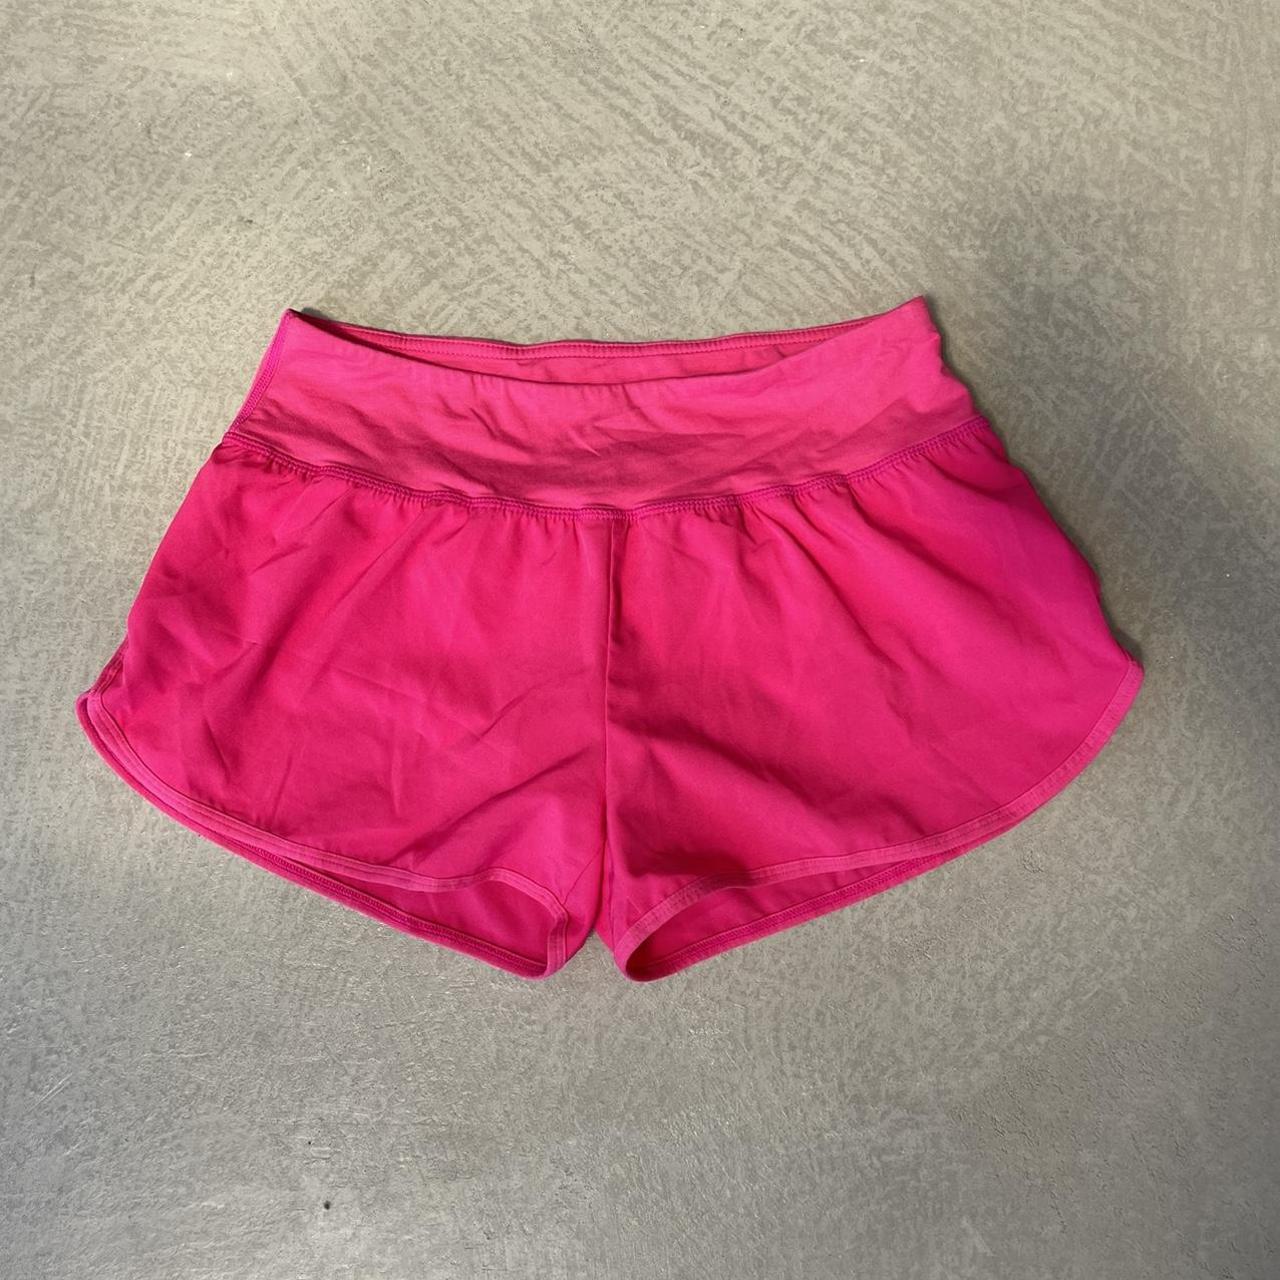 Zyia Active hot pink shorts Size S- fit just like... - Depop